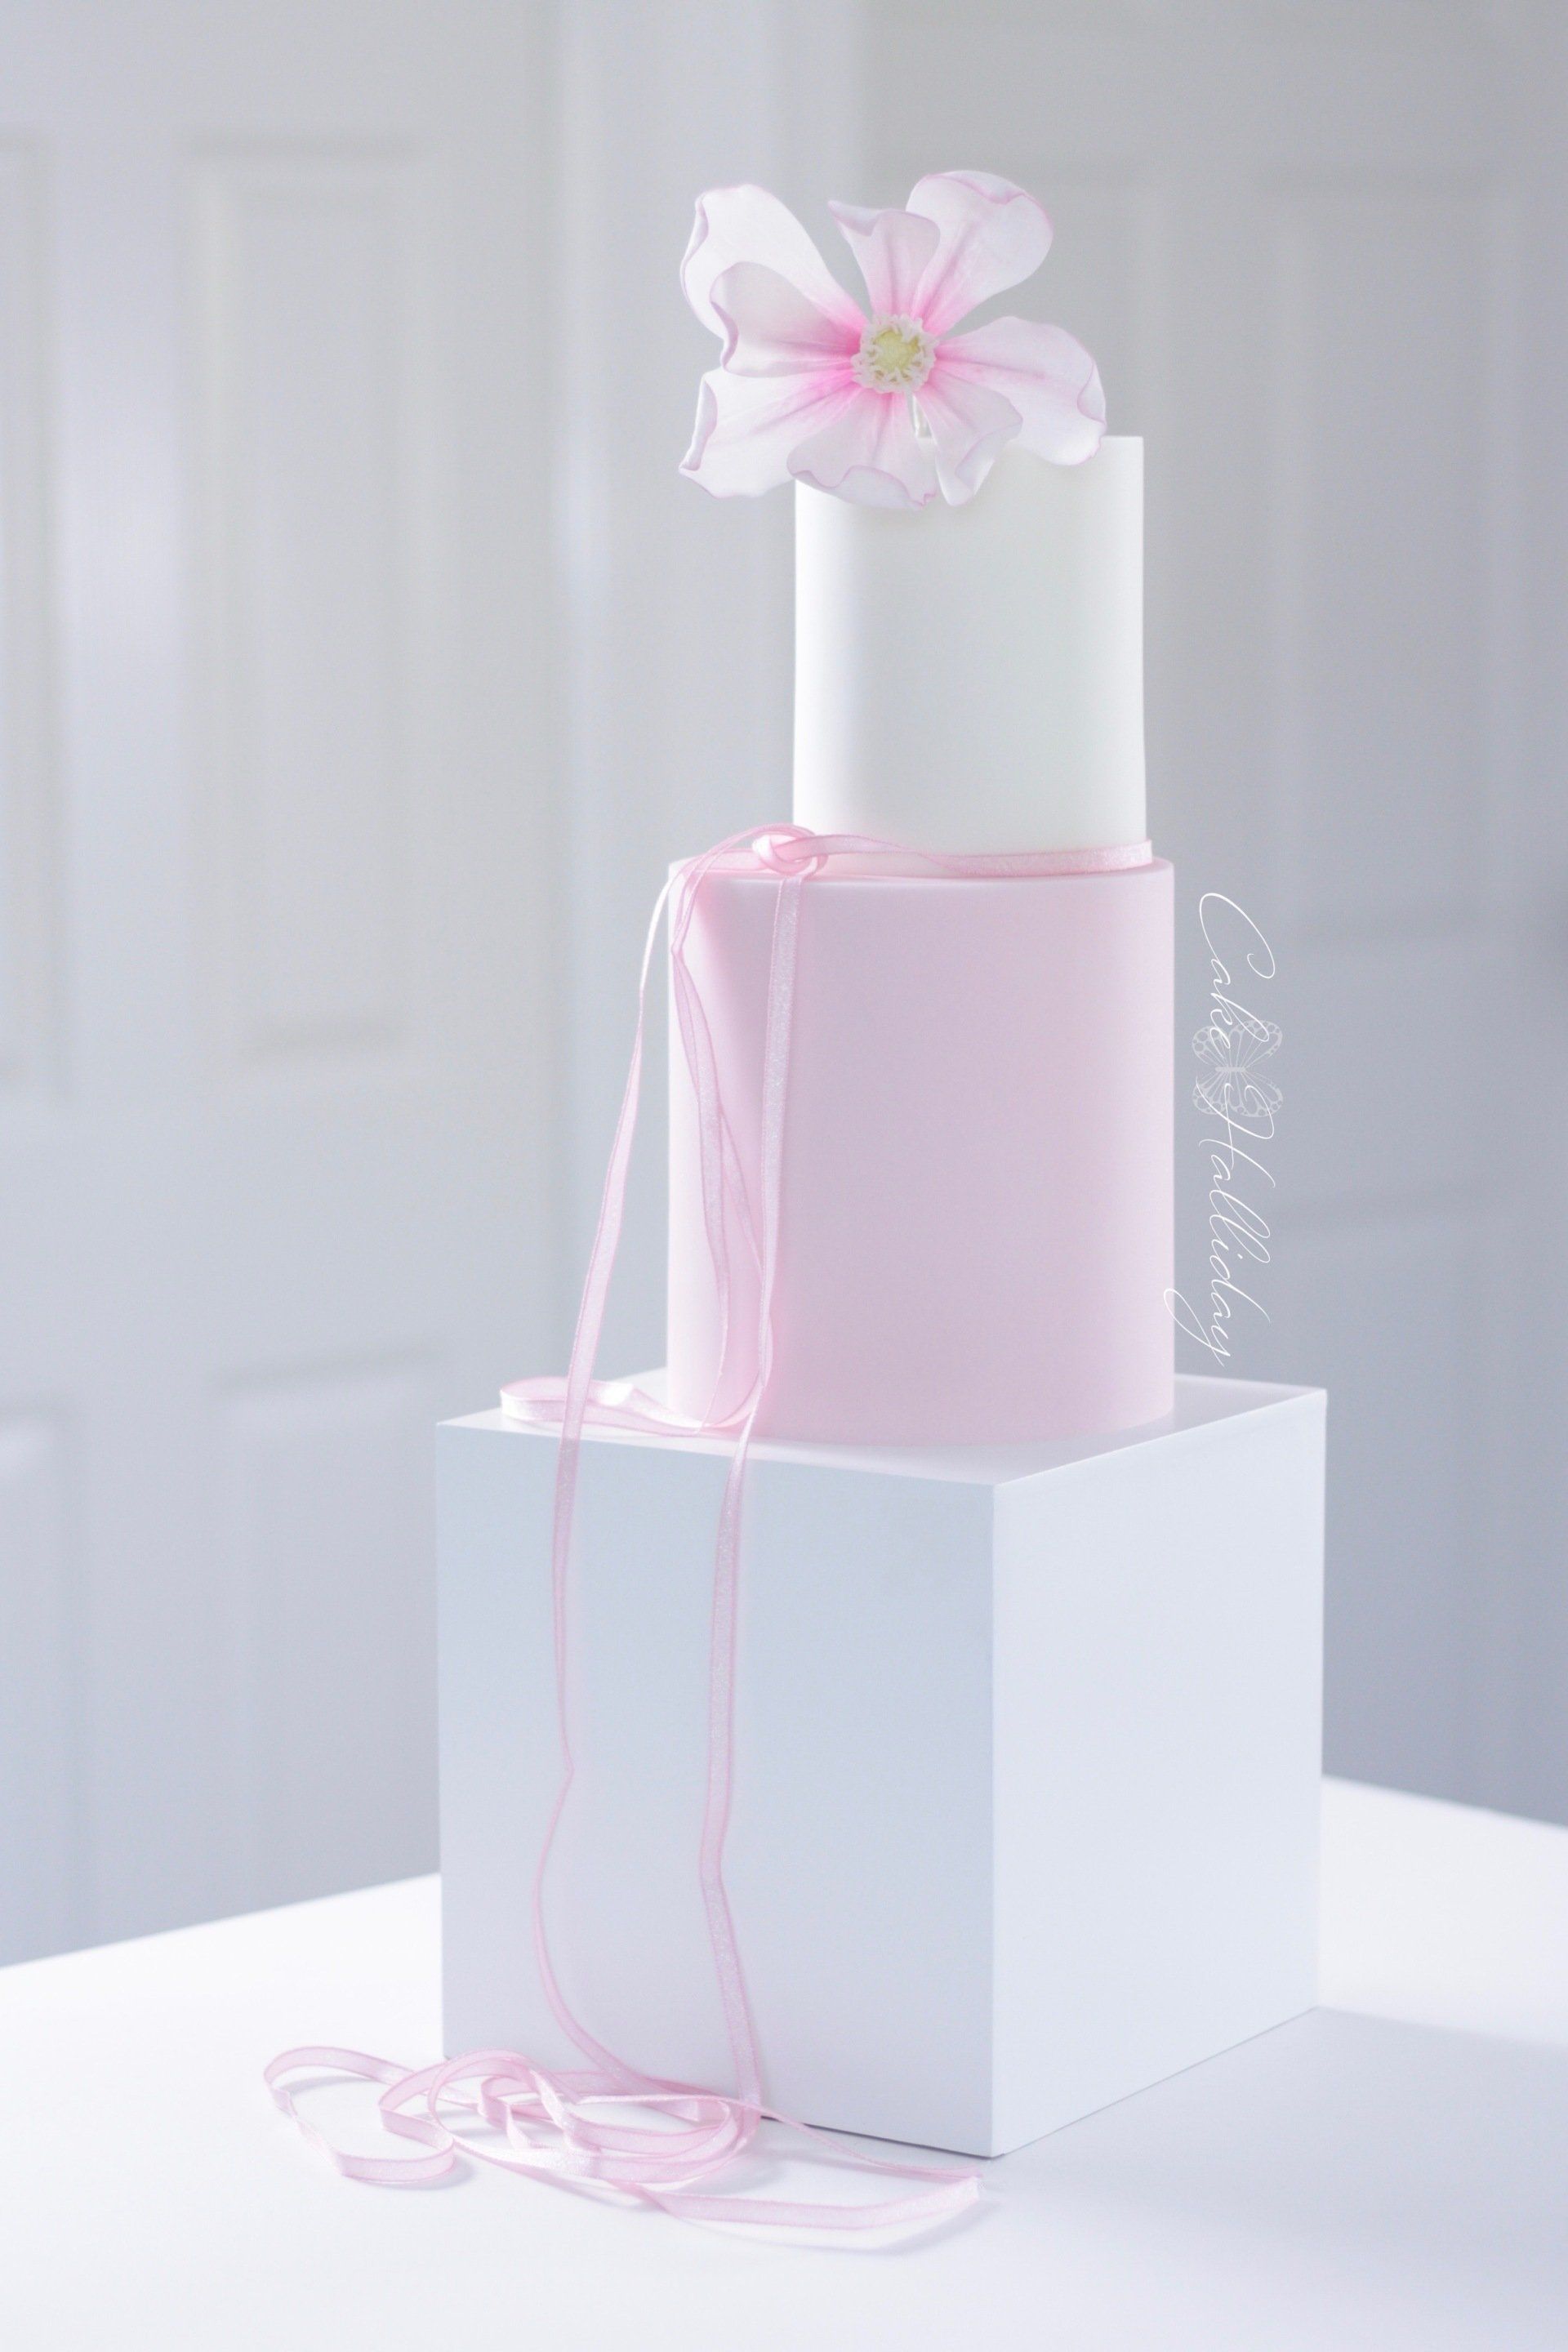 Pink and white wedding cake with sugar magnolia